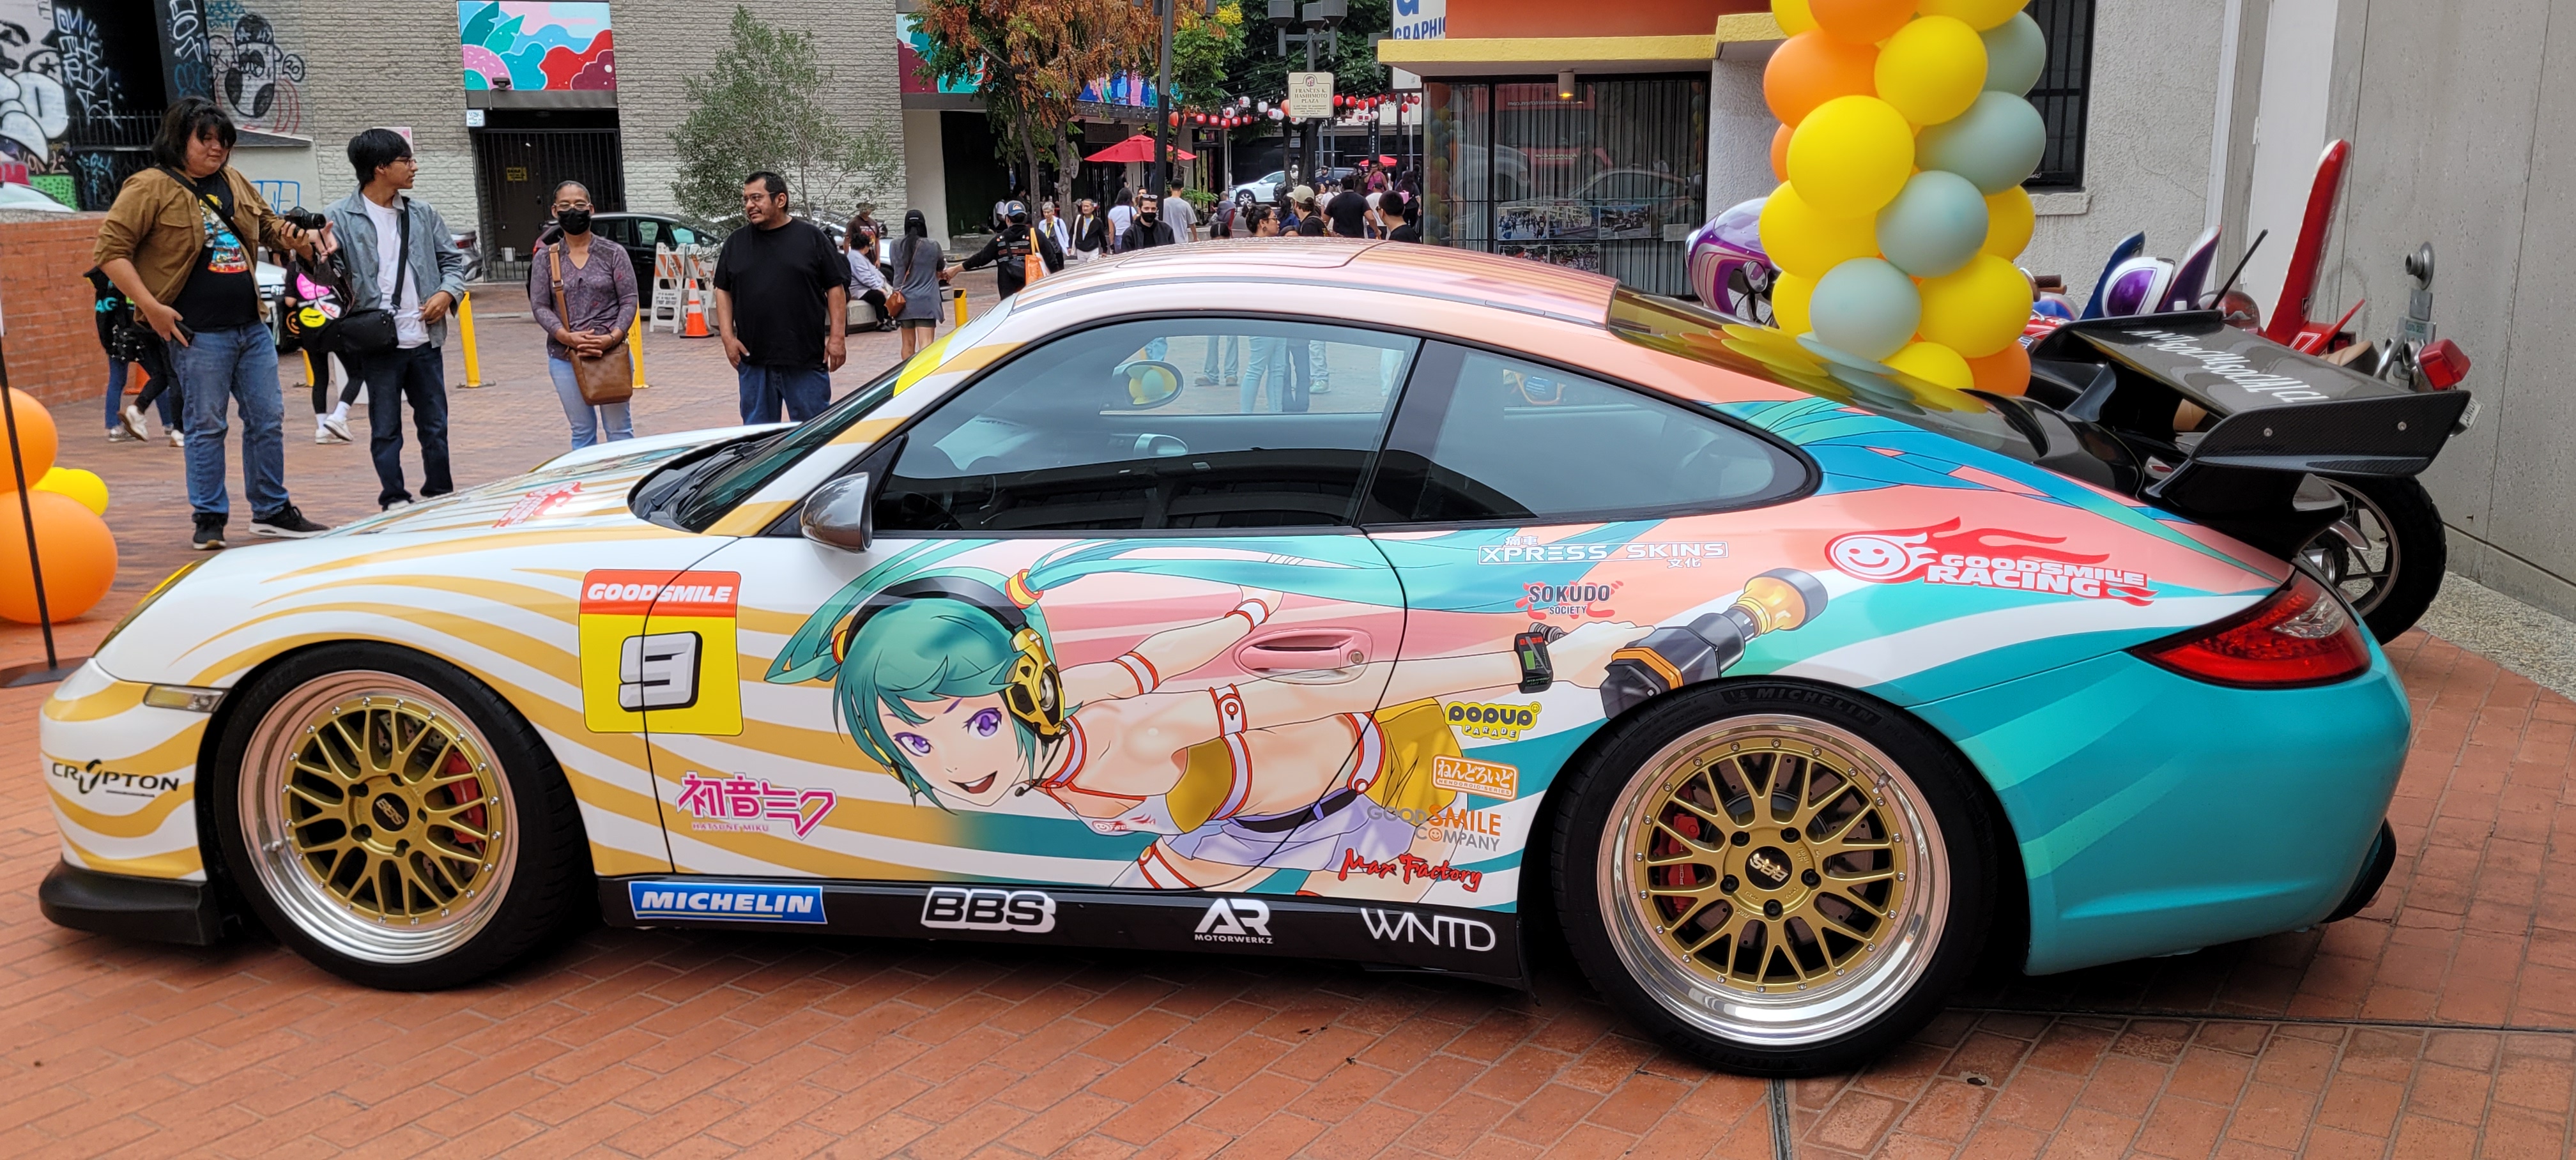 a photo of the miku itasha car. the car is primarily orange and yellow near the front, with the colors gradiating to blue near the back of the car. an ilustration of miku in an orange racing uniform holding an orange impact wrench is featured prominently, alongside several sponsor logos.